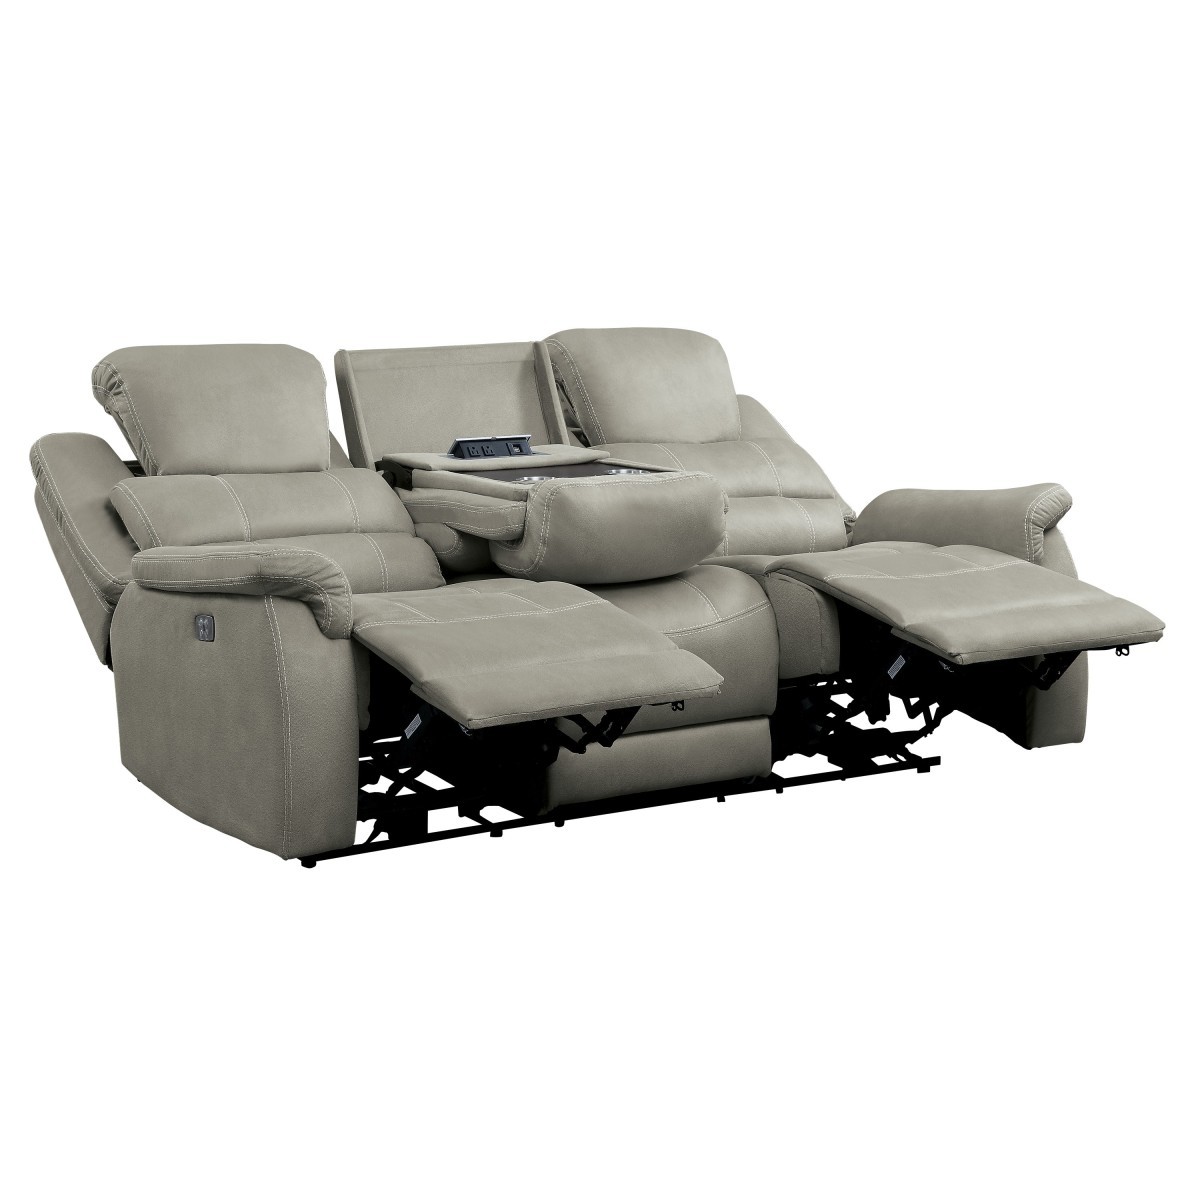 9848gy 3 double reclining sofa with drop down cup holders